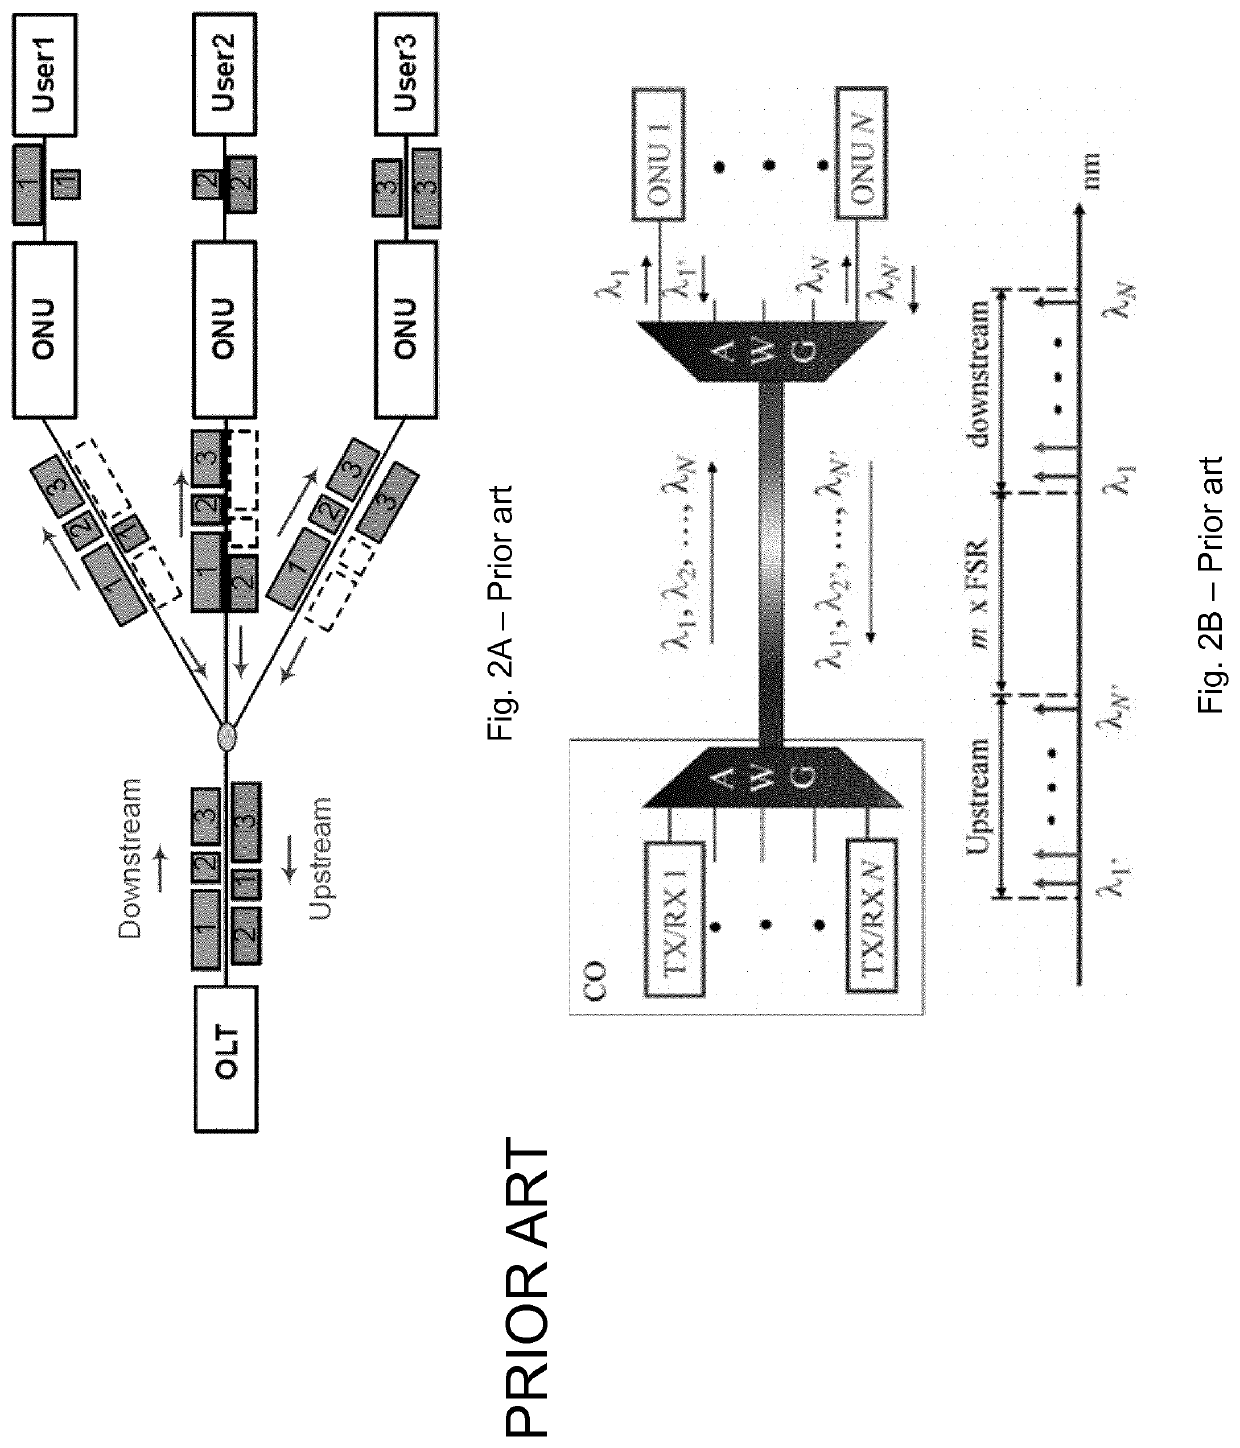 Optical Line Terminal And Optical Fiber Access System With Increased Capacity